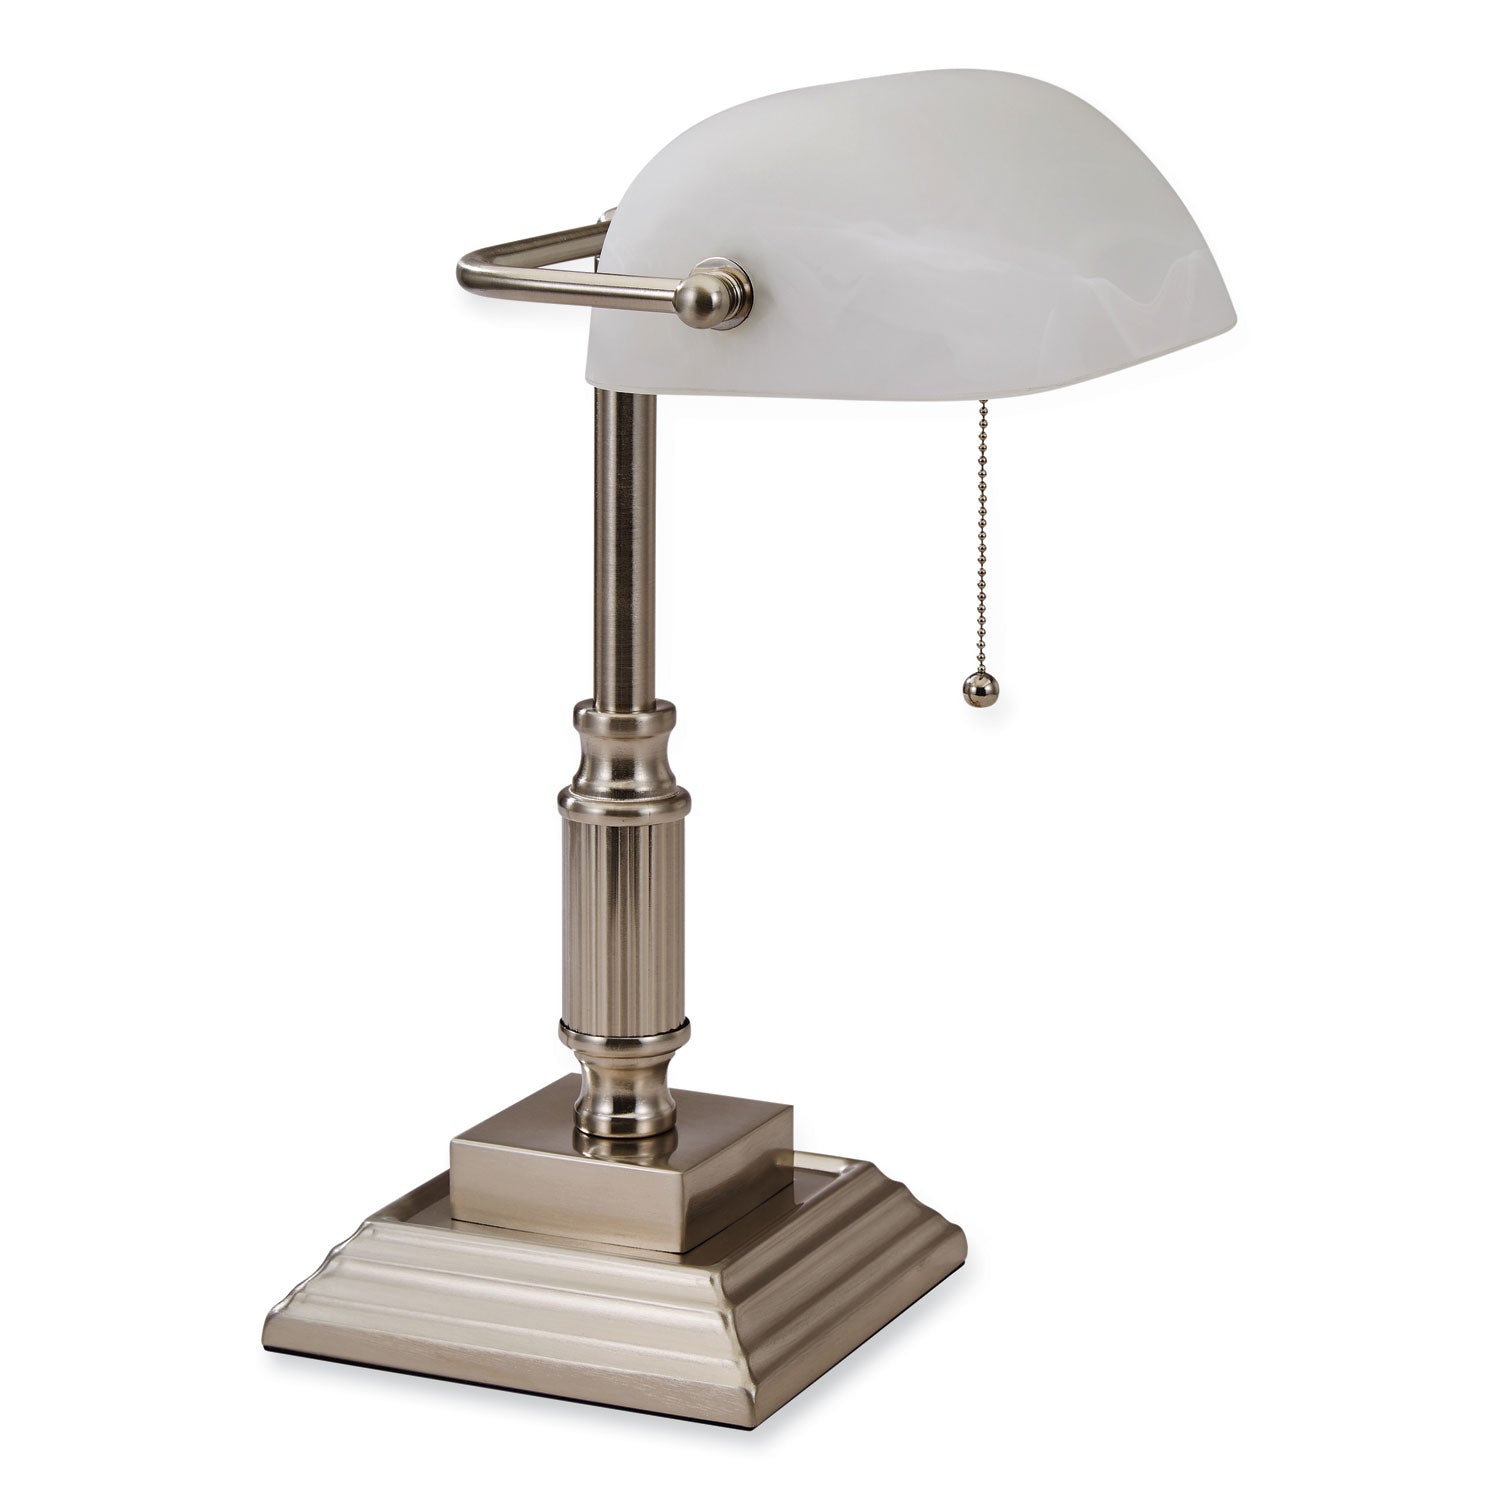 led-bankers-lamp-with-frosted-shade-1475-high-brushed-nickel-ships-in-4-6-business-days_vlu8vs688029bn - 2